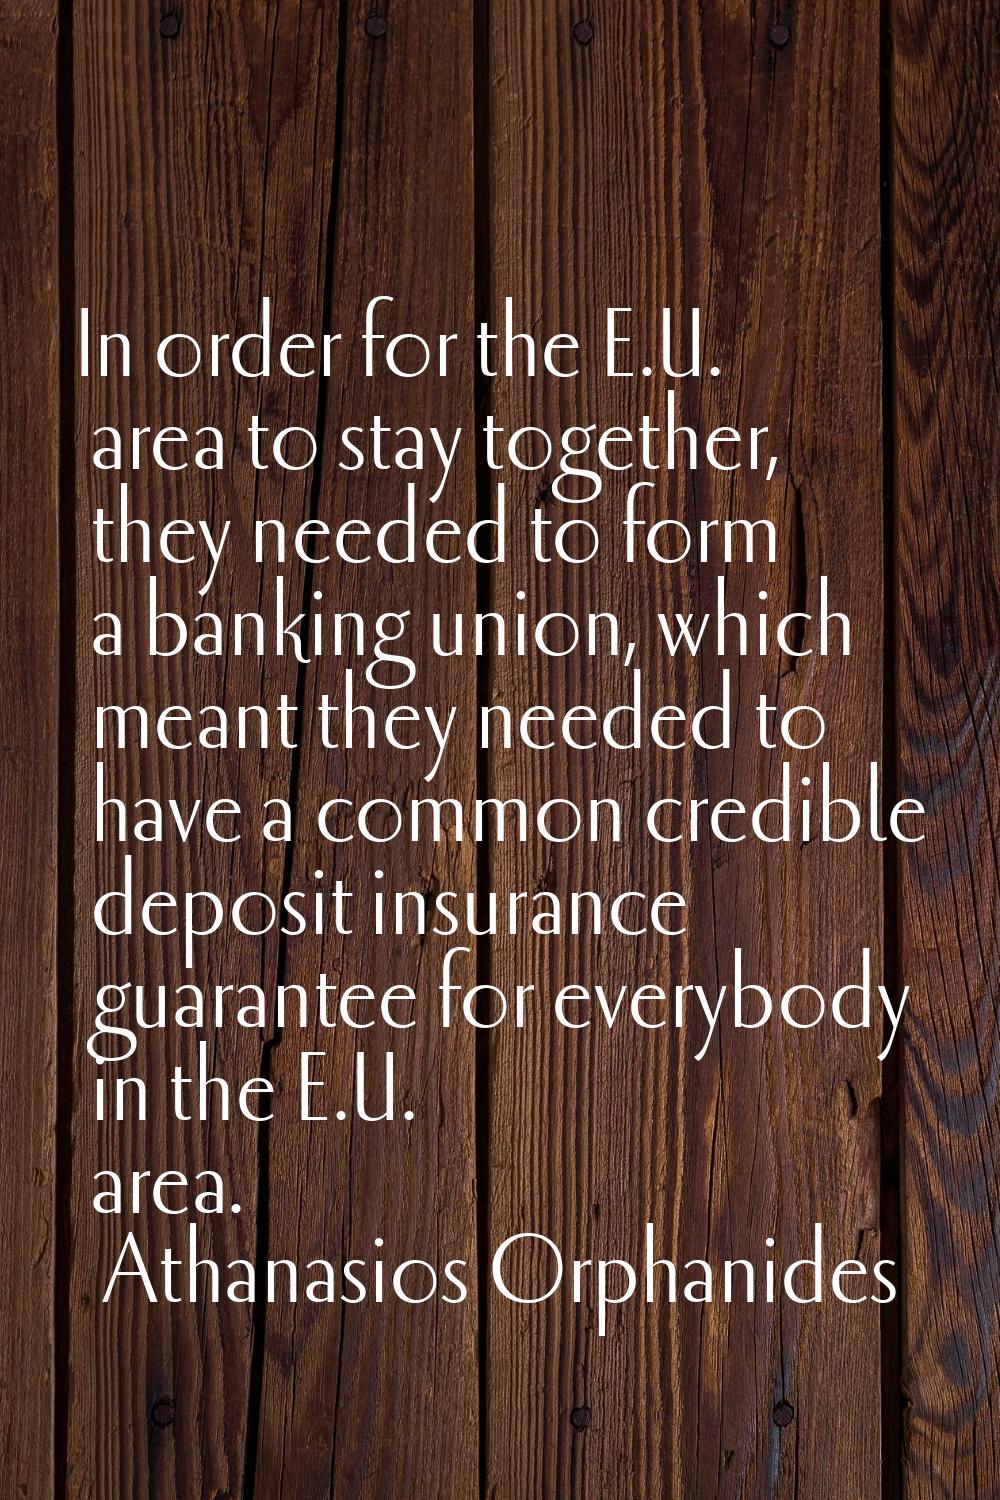 In order for the E.U. area to stay together, they needed to form a banking union, which meant they 